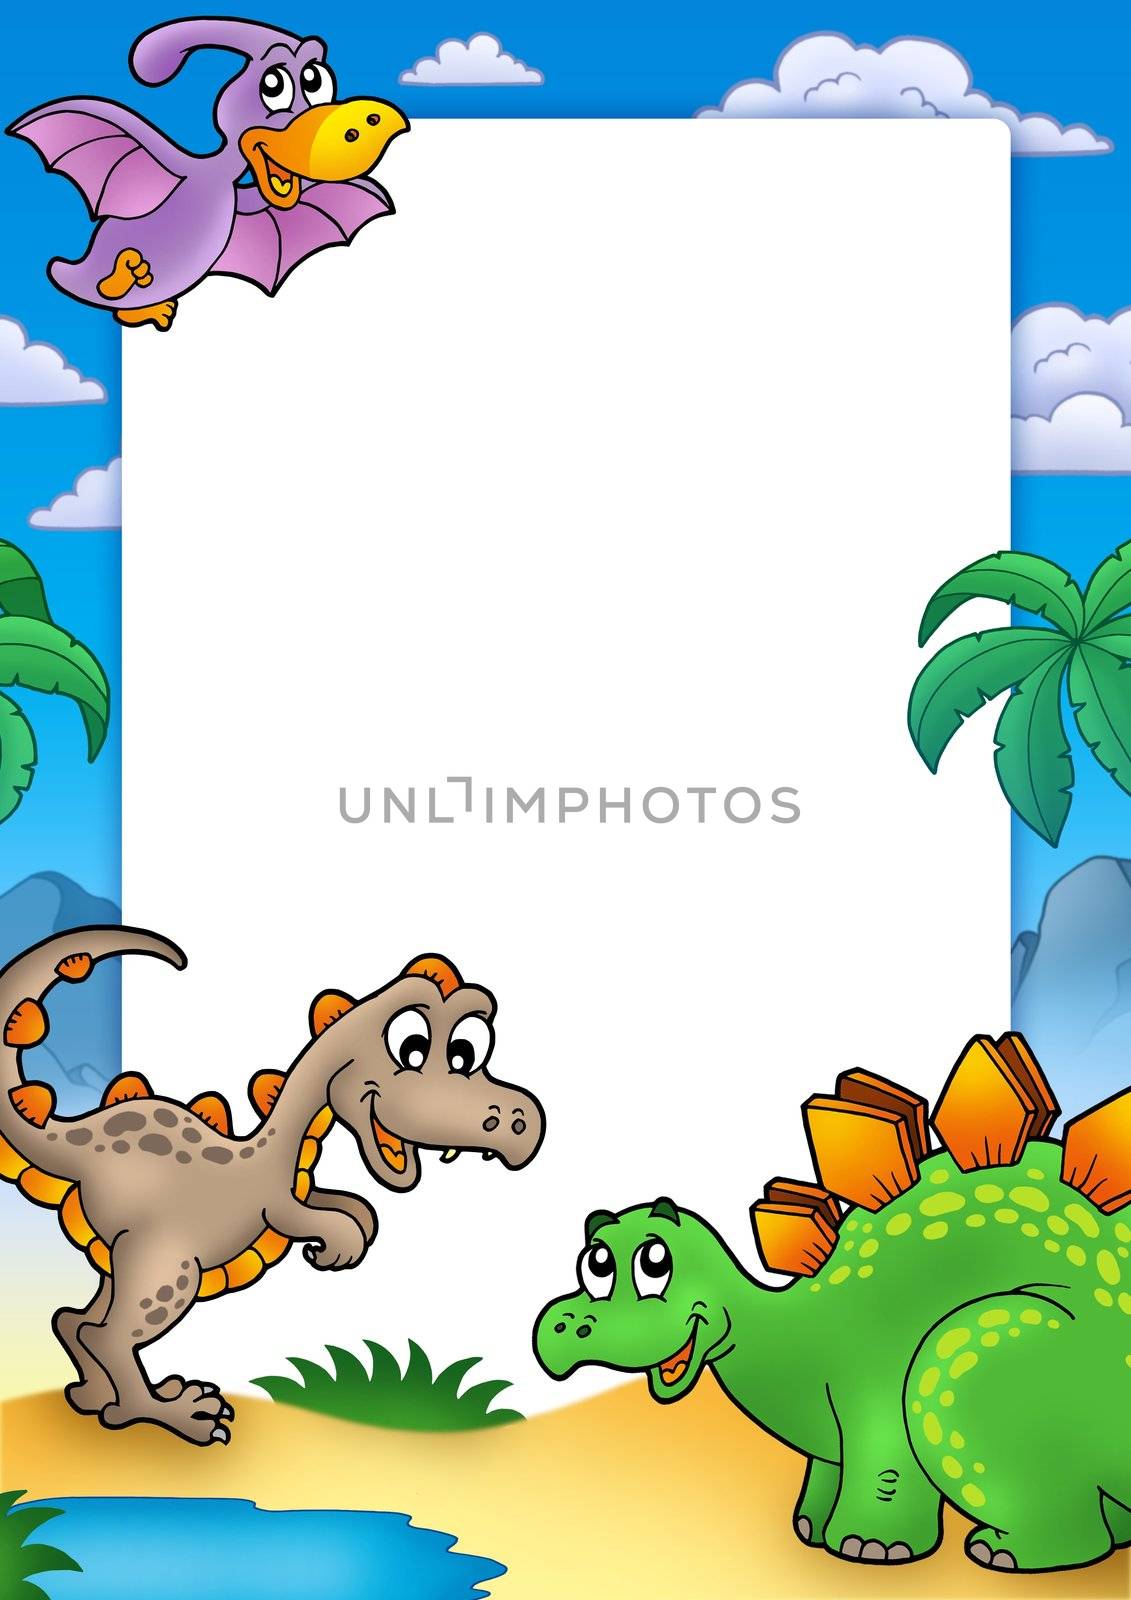 Prehistoric frame with dinosaurs - color illustration.